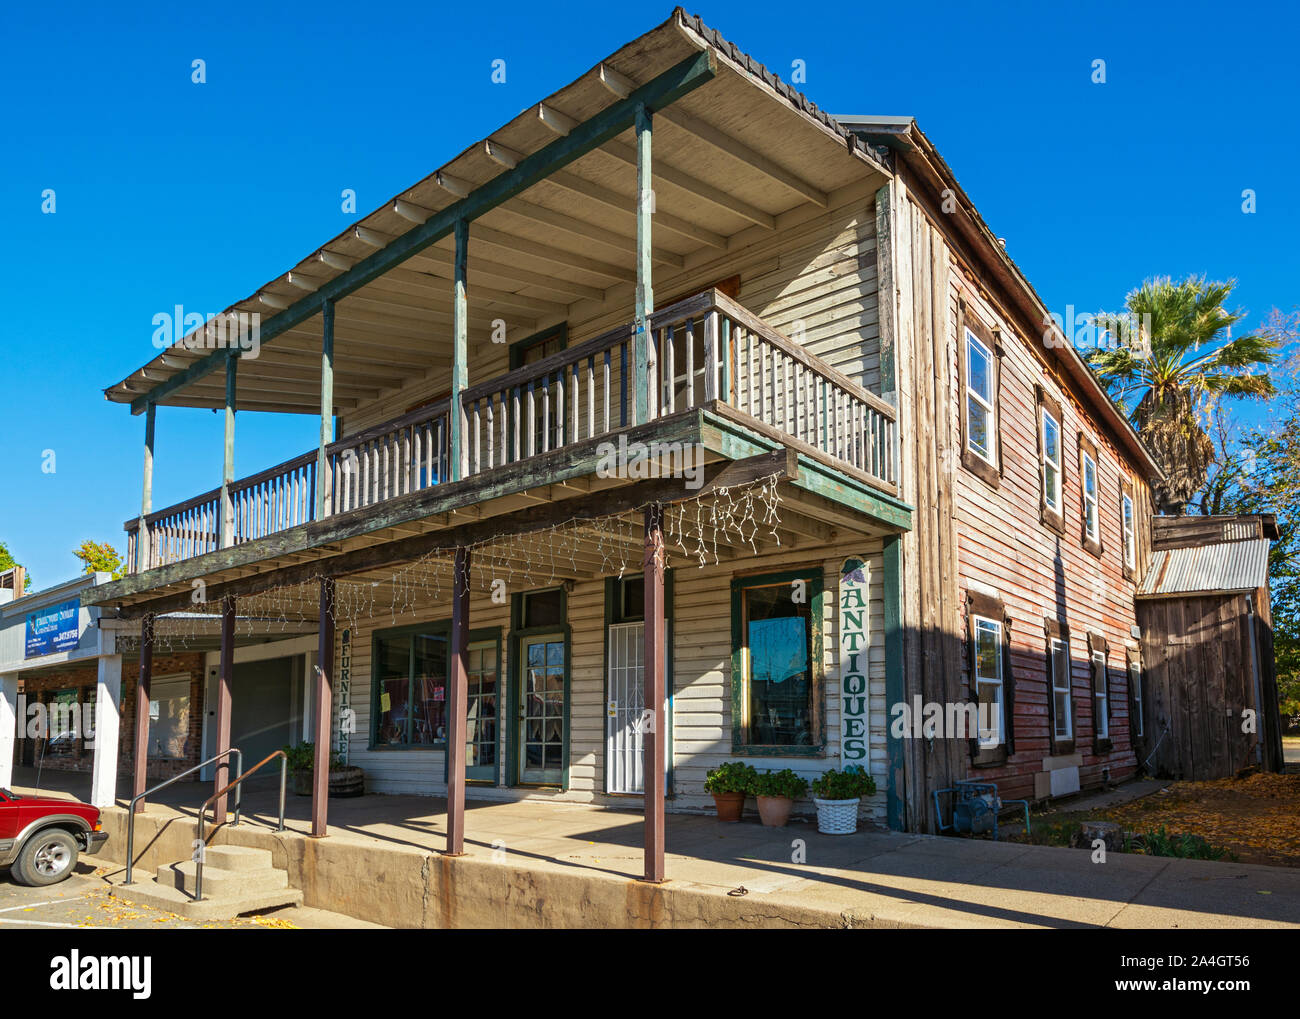 California, Shasta County, Cottonwood, stagecoach town settled in 1849, antique shop Stock Photo